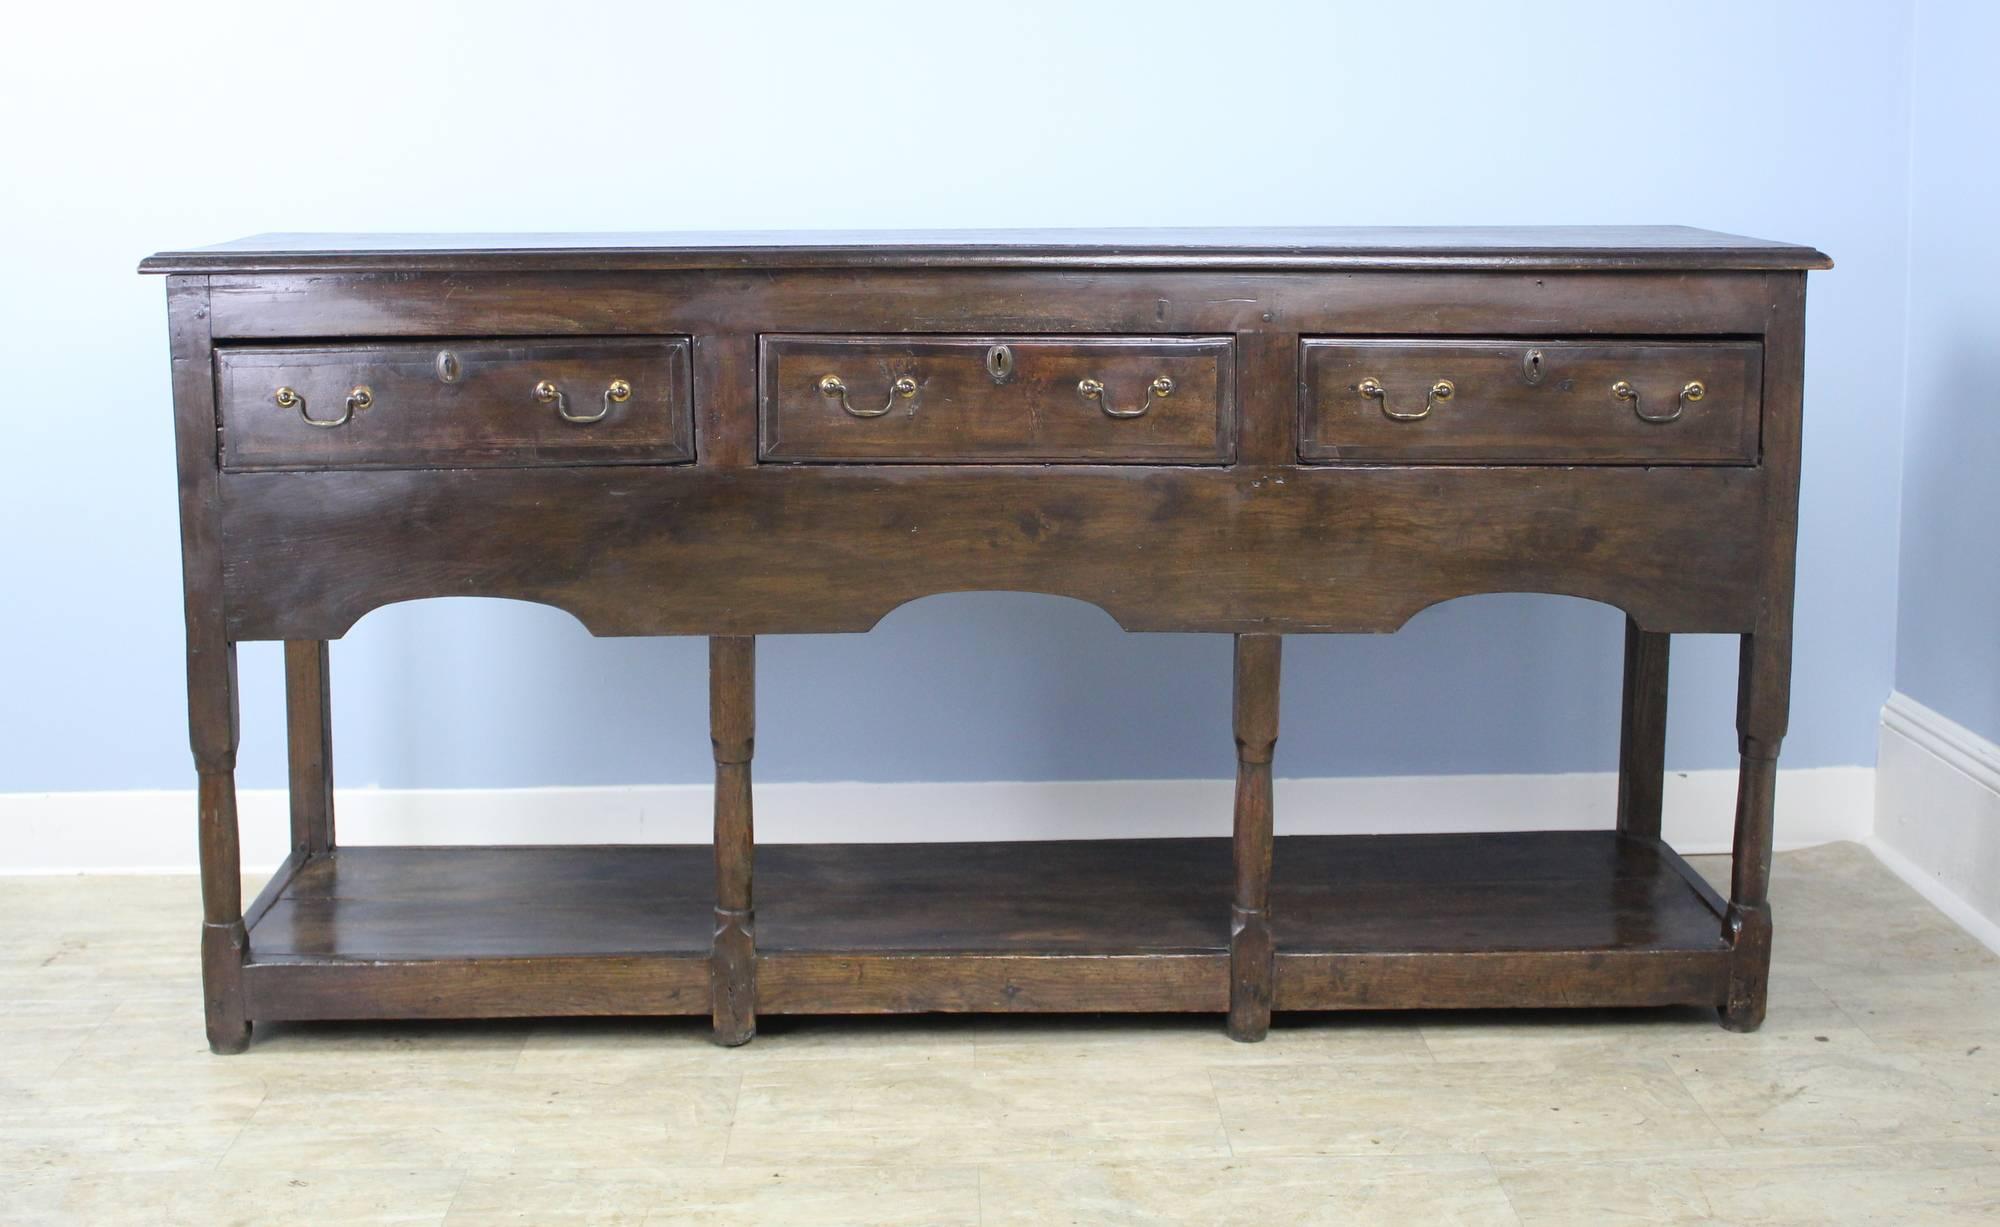 With fine strong molding around the top of the drawer section, and well carved scallop detail at the apron, this console is an excellent example of classic early Welsh period furniture. The legs are neatly turned, and the all-around pot board base